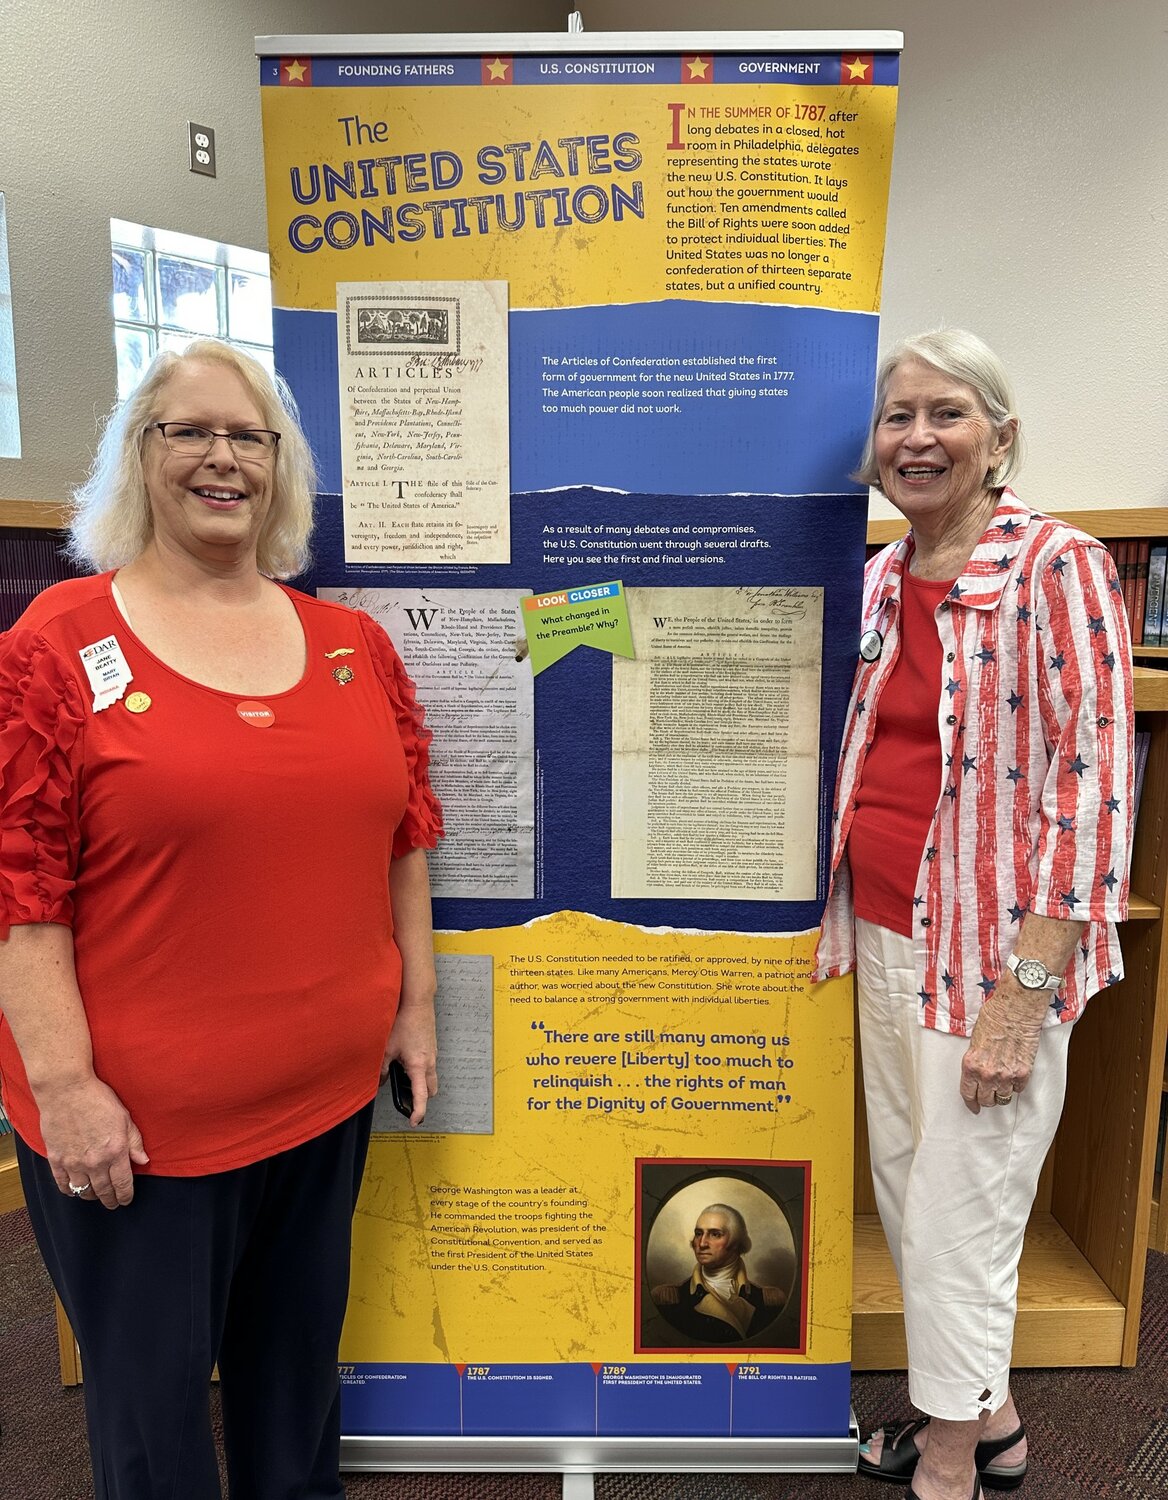 Sun City DAR Agua Fria Daughters Jane Beatty and Lynn Conner interacted with the students by discussing the forming of the United States Constitution and the Bill of Rights’ 10 amendments to protect individual liberties.